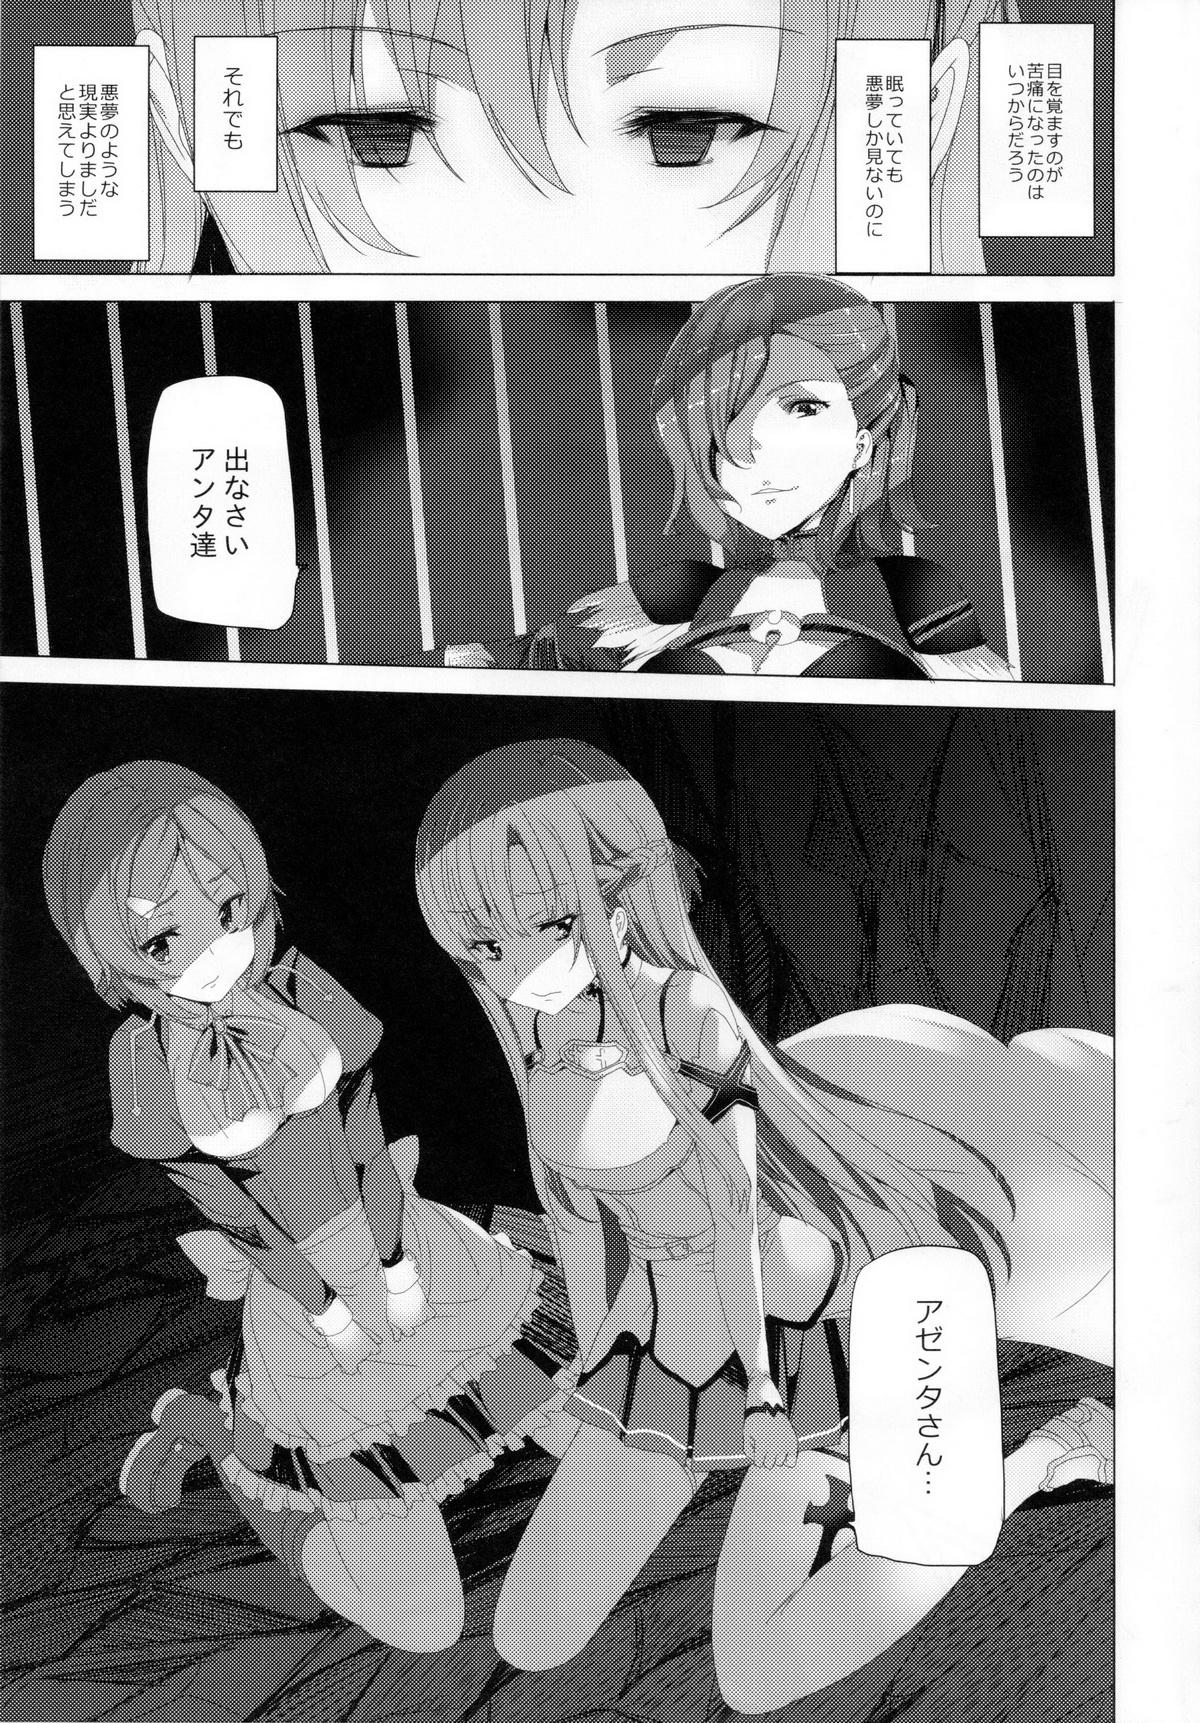 Spanking WRONG WORLD - Sword art online No Condom - Page 7